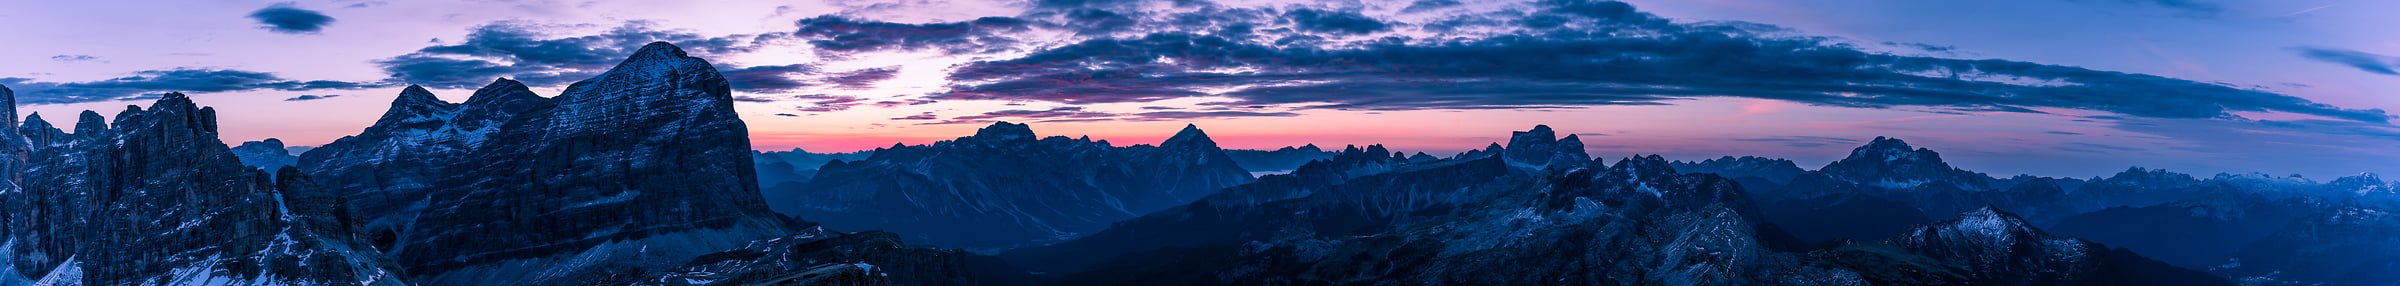 290 megapixels! A very high resolution, large-format VAST photo print of a mountain range at sunset; wallpaper photograph created by Alfred Feil in Lagazuoi, Alta Badia, Italy.